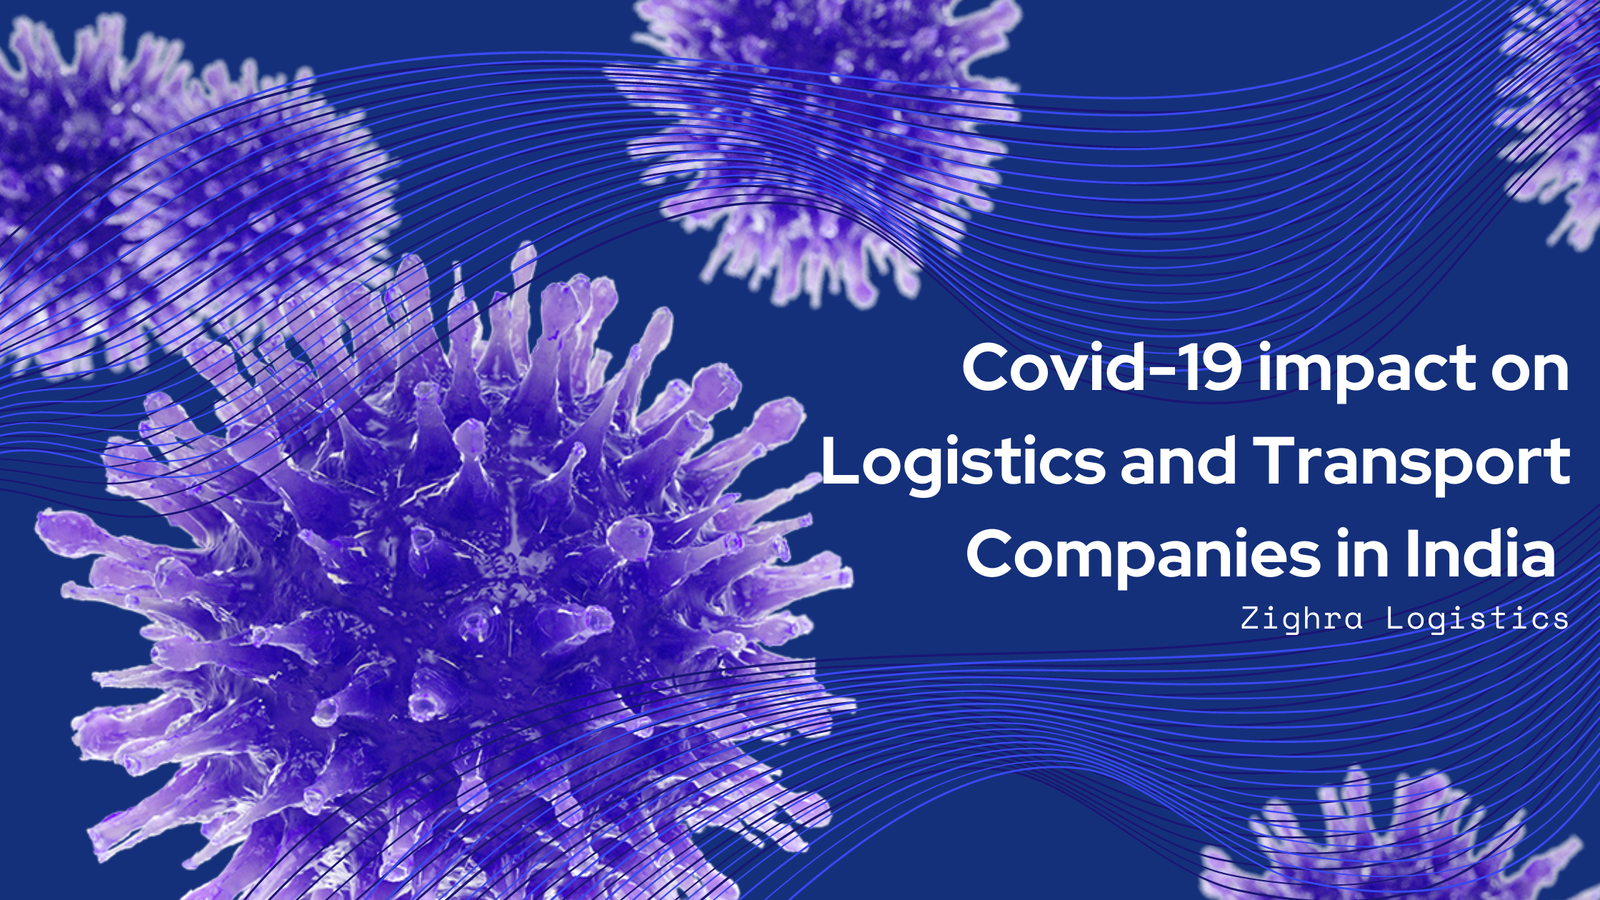 Covid-19 Effect on Logistics and Transport companies in India